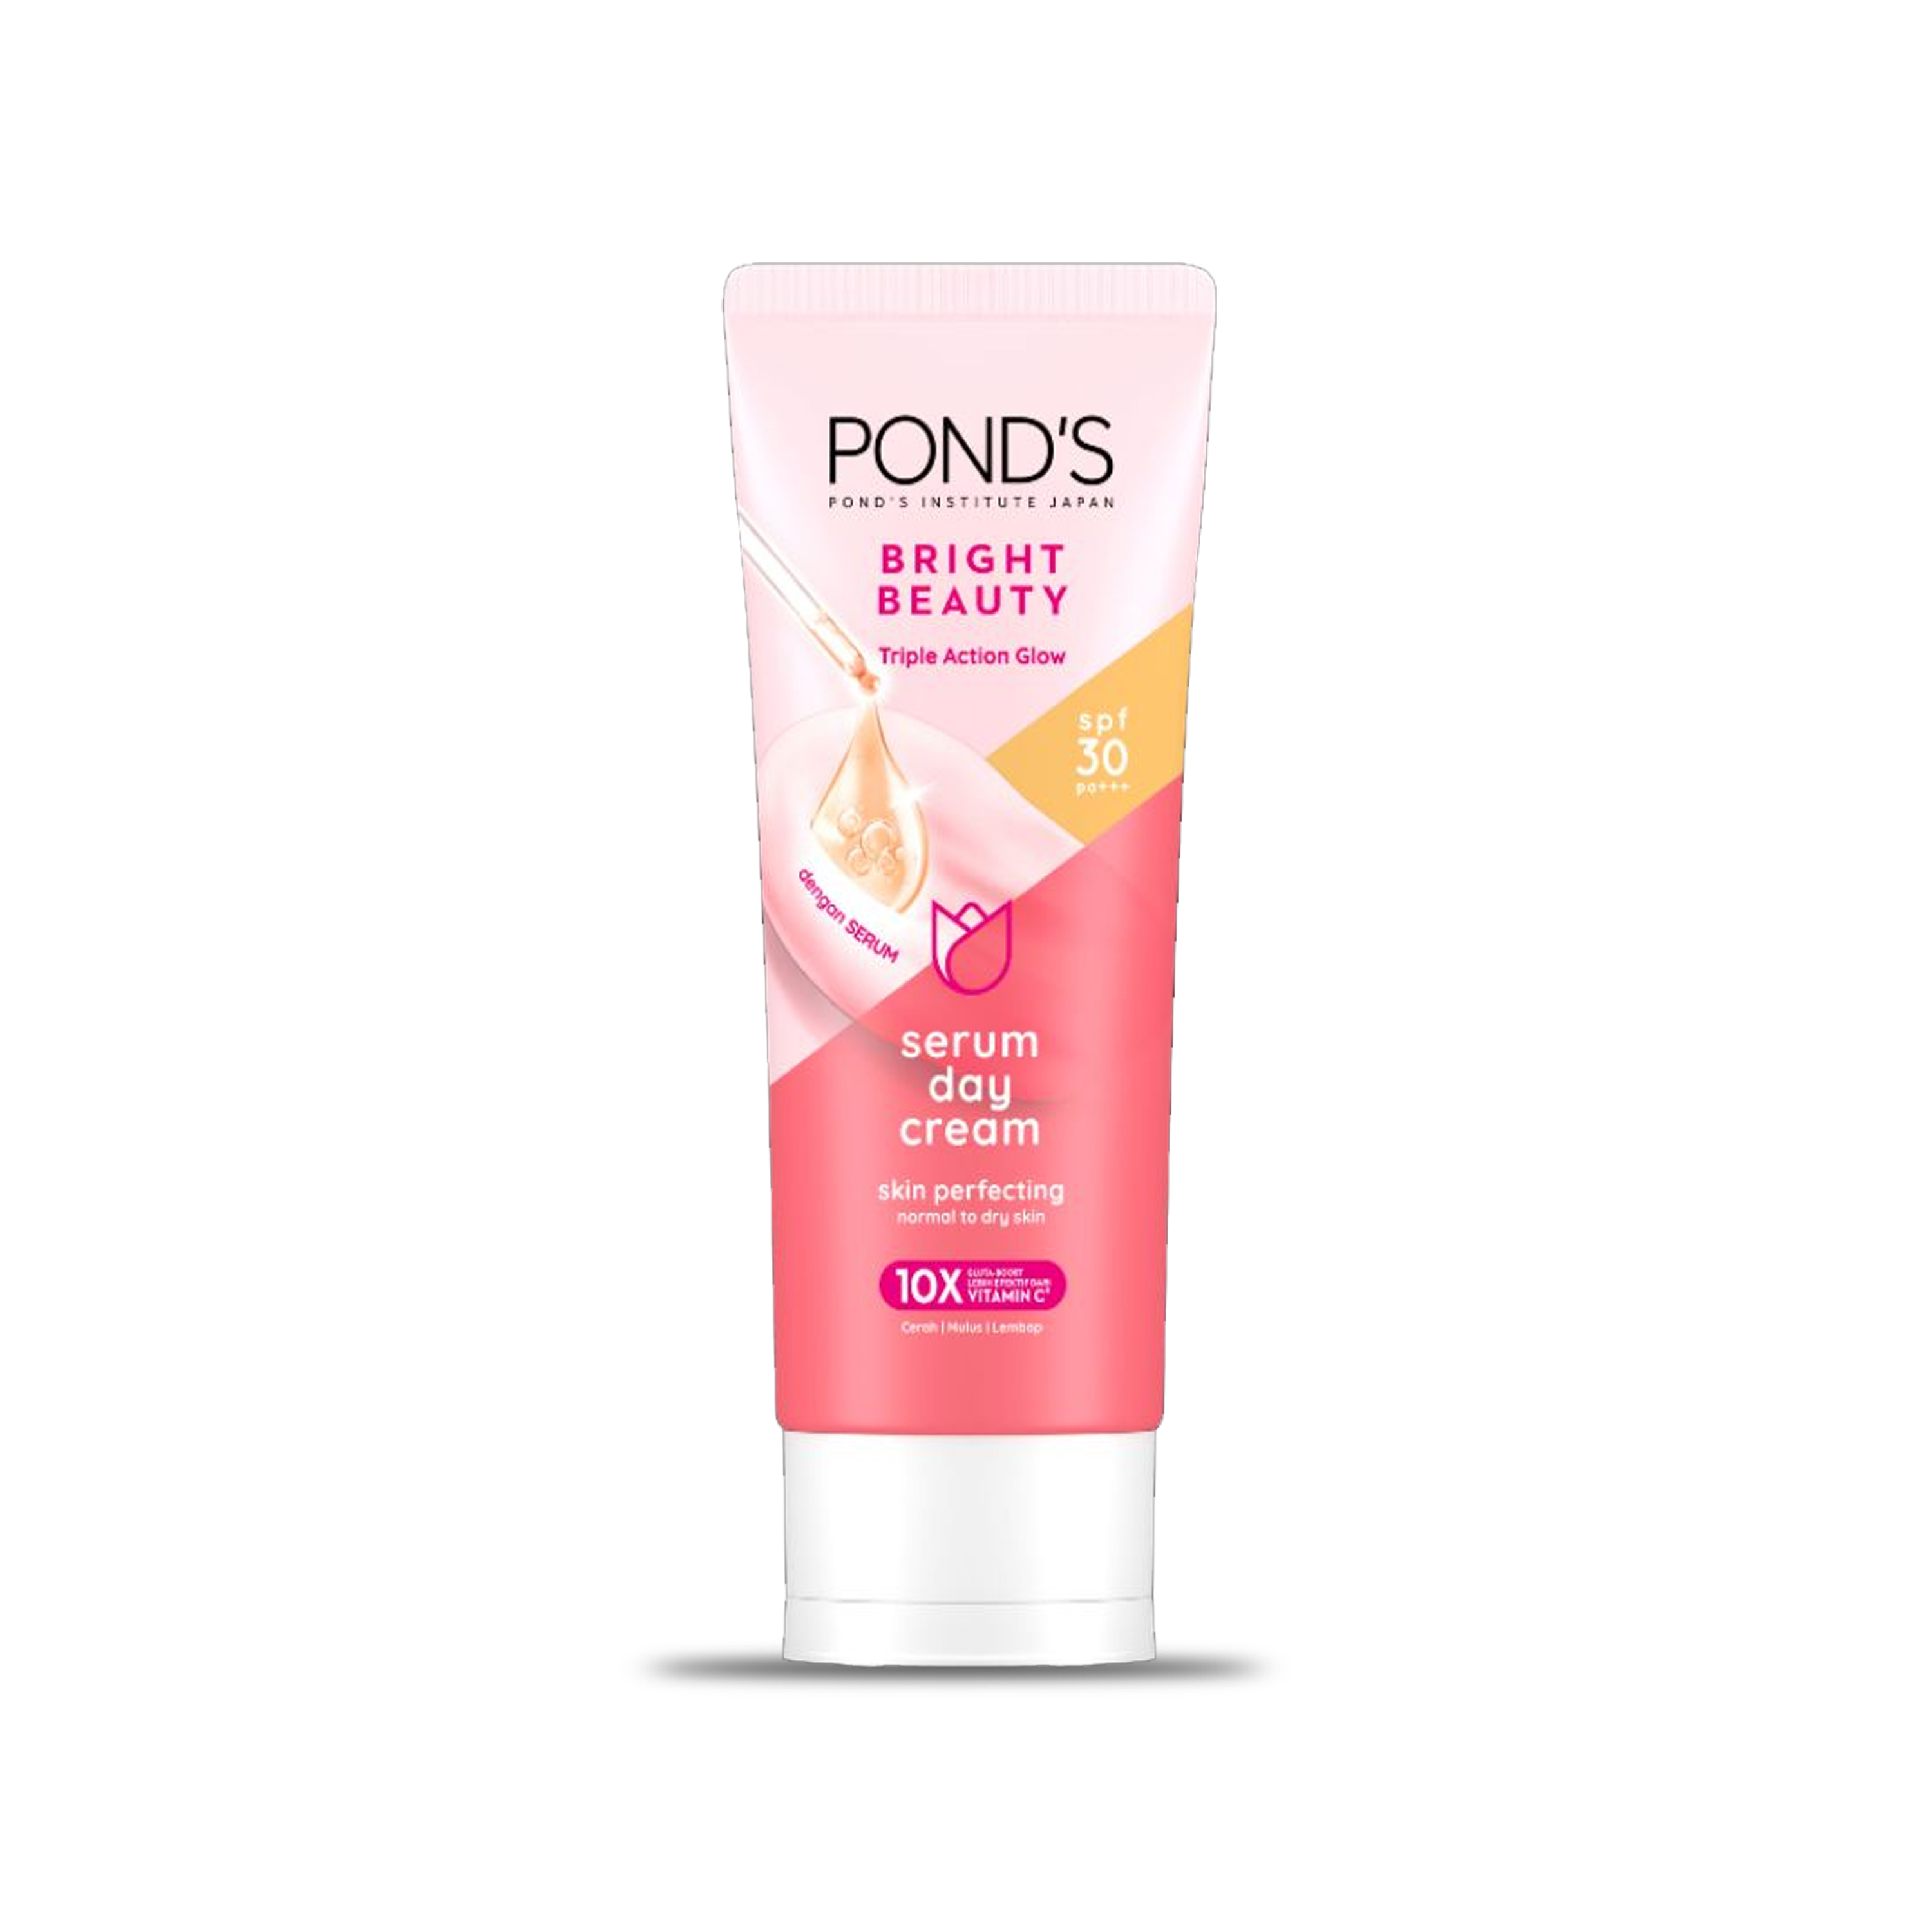 POND'S Ponds Bright Beauty Skin Perfecting Cream SPF 30 PA+++ for Dry Skin 20 gr /  Pelembab Siang Kulit Kering